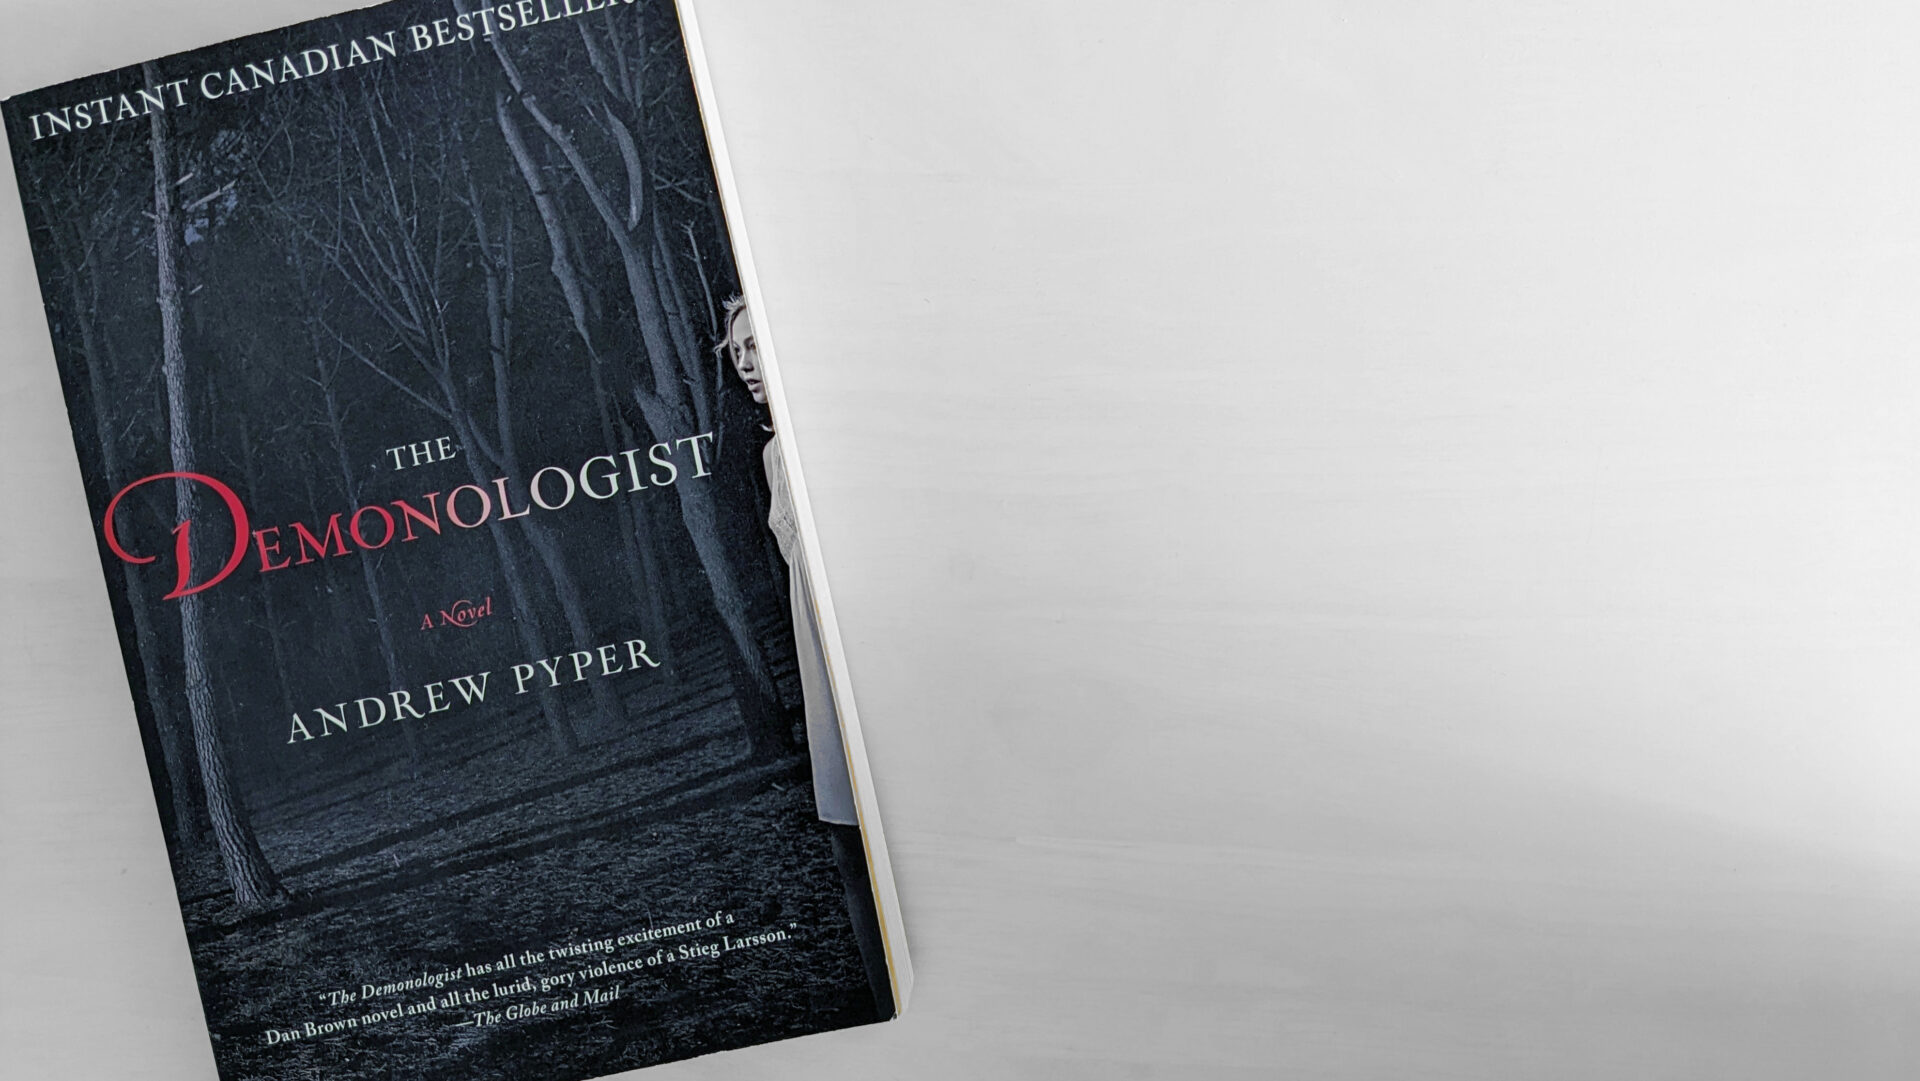 The Demonologist by Andrew Pyper: My Favorite Book